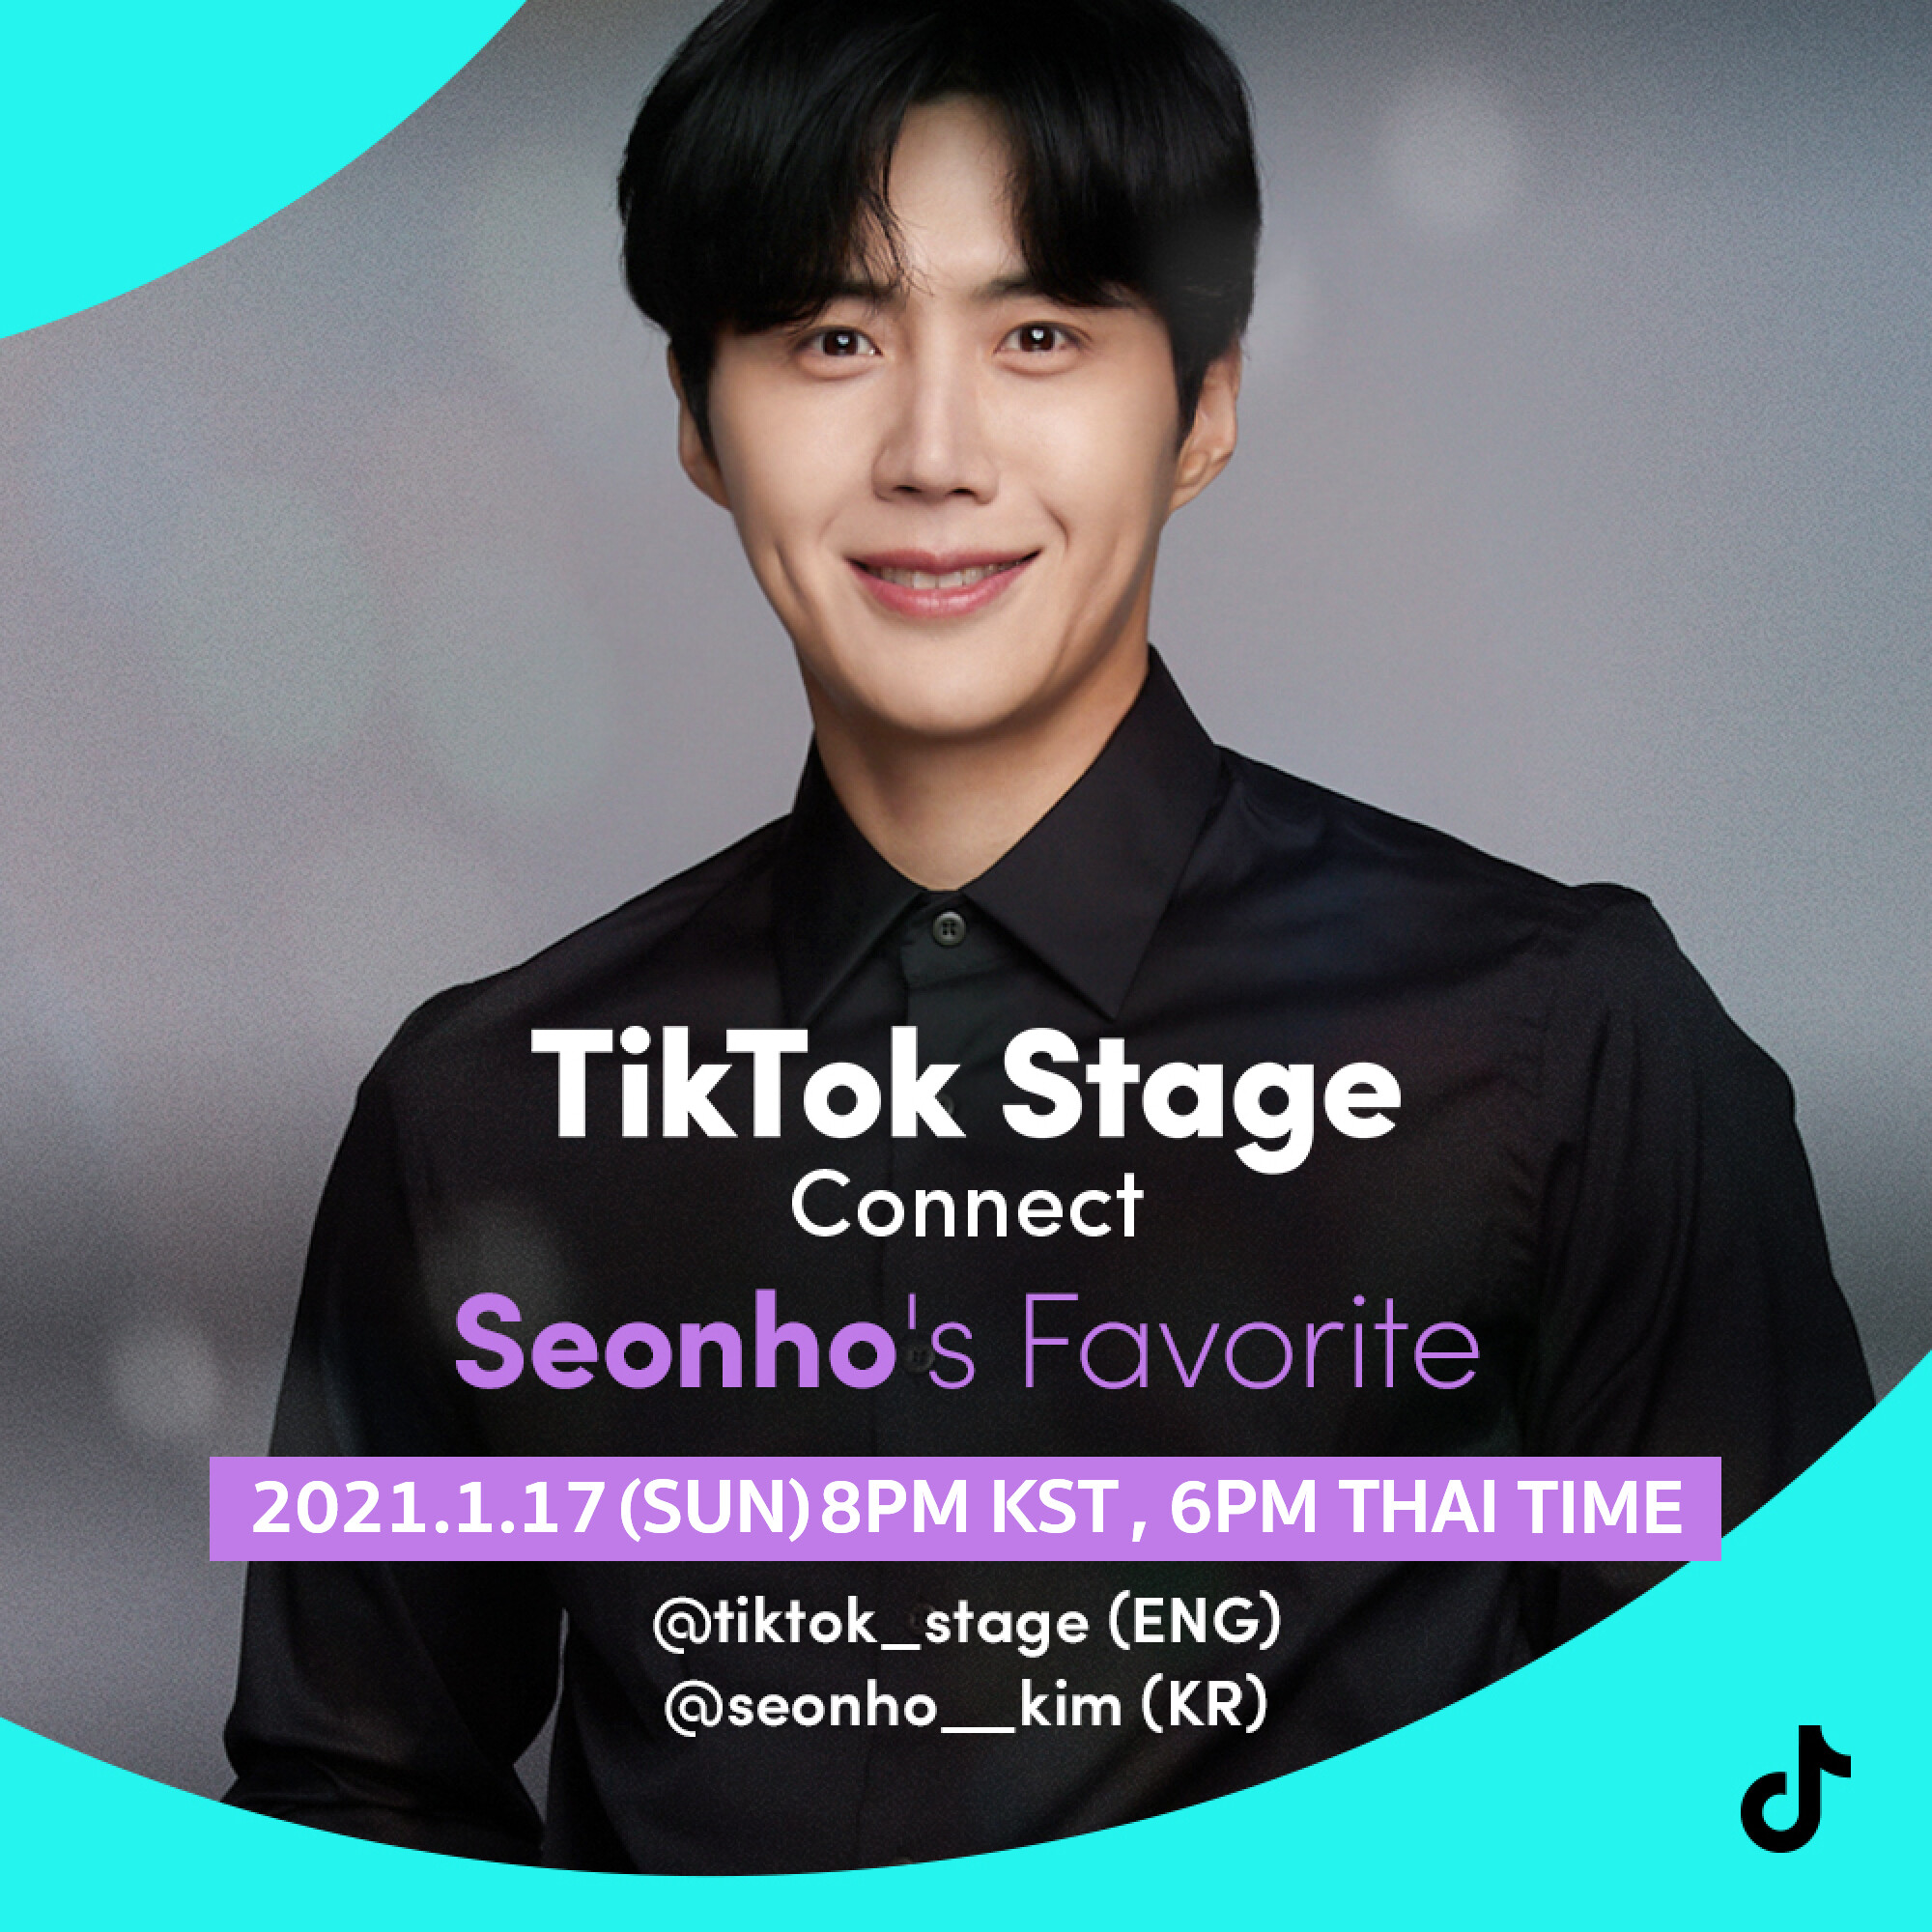 TikTok invites fans in Thailand to join the exclusive 'TikTok Stage Connect - Seon-ho's Favorite' event and interact with the actor on January 17, 2021